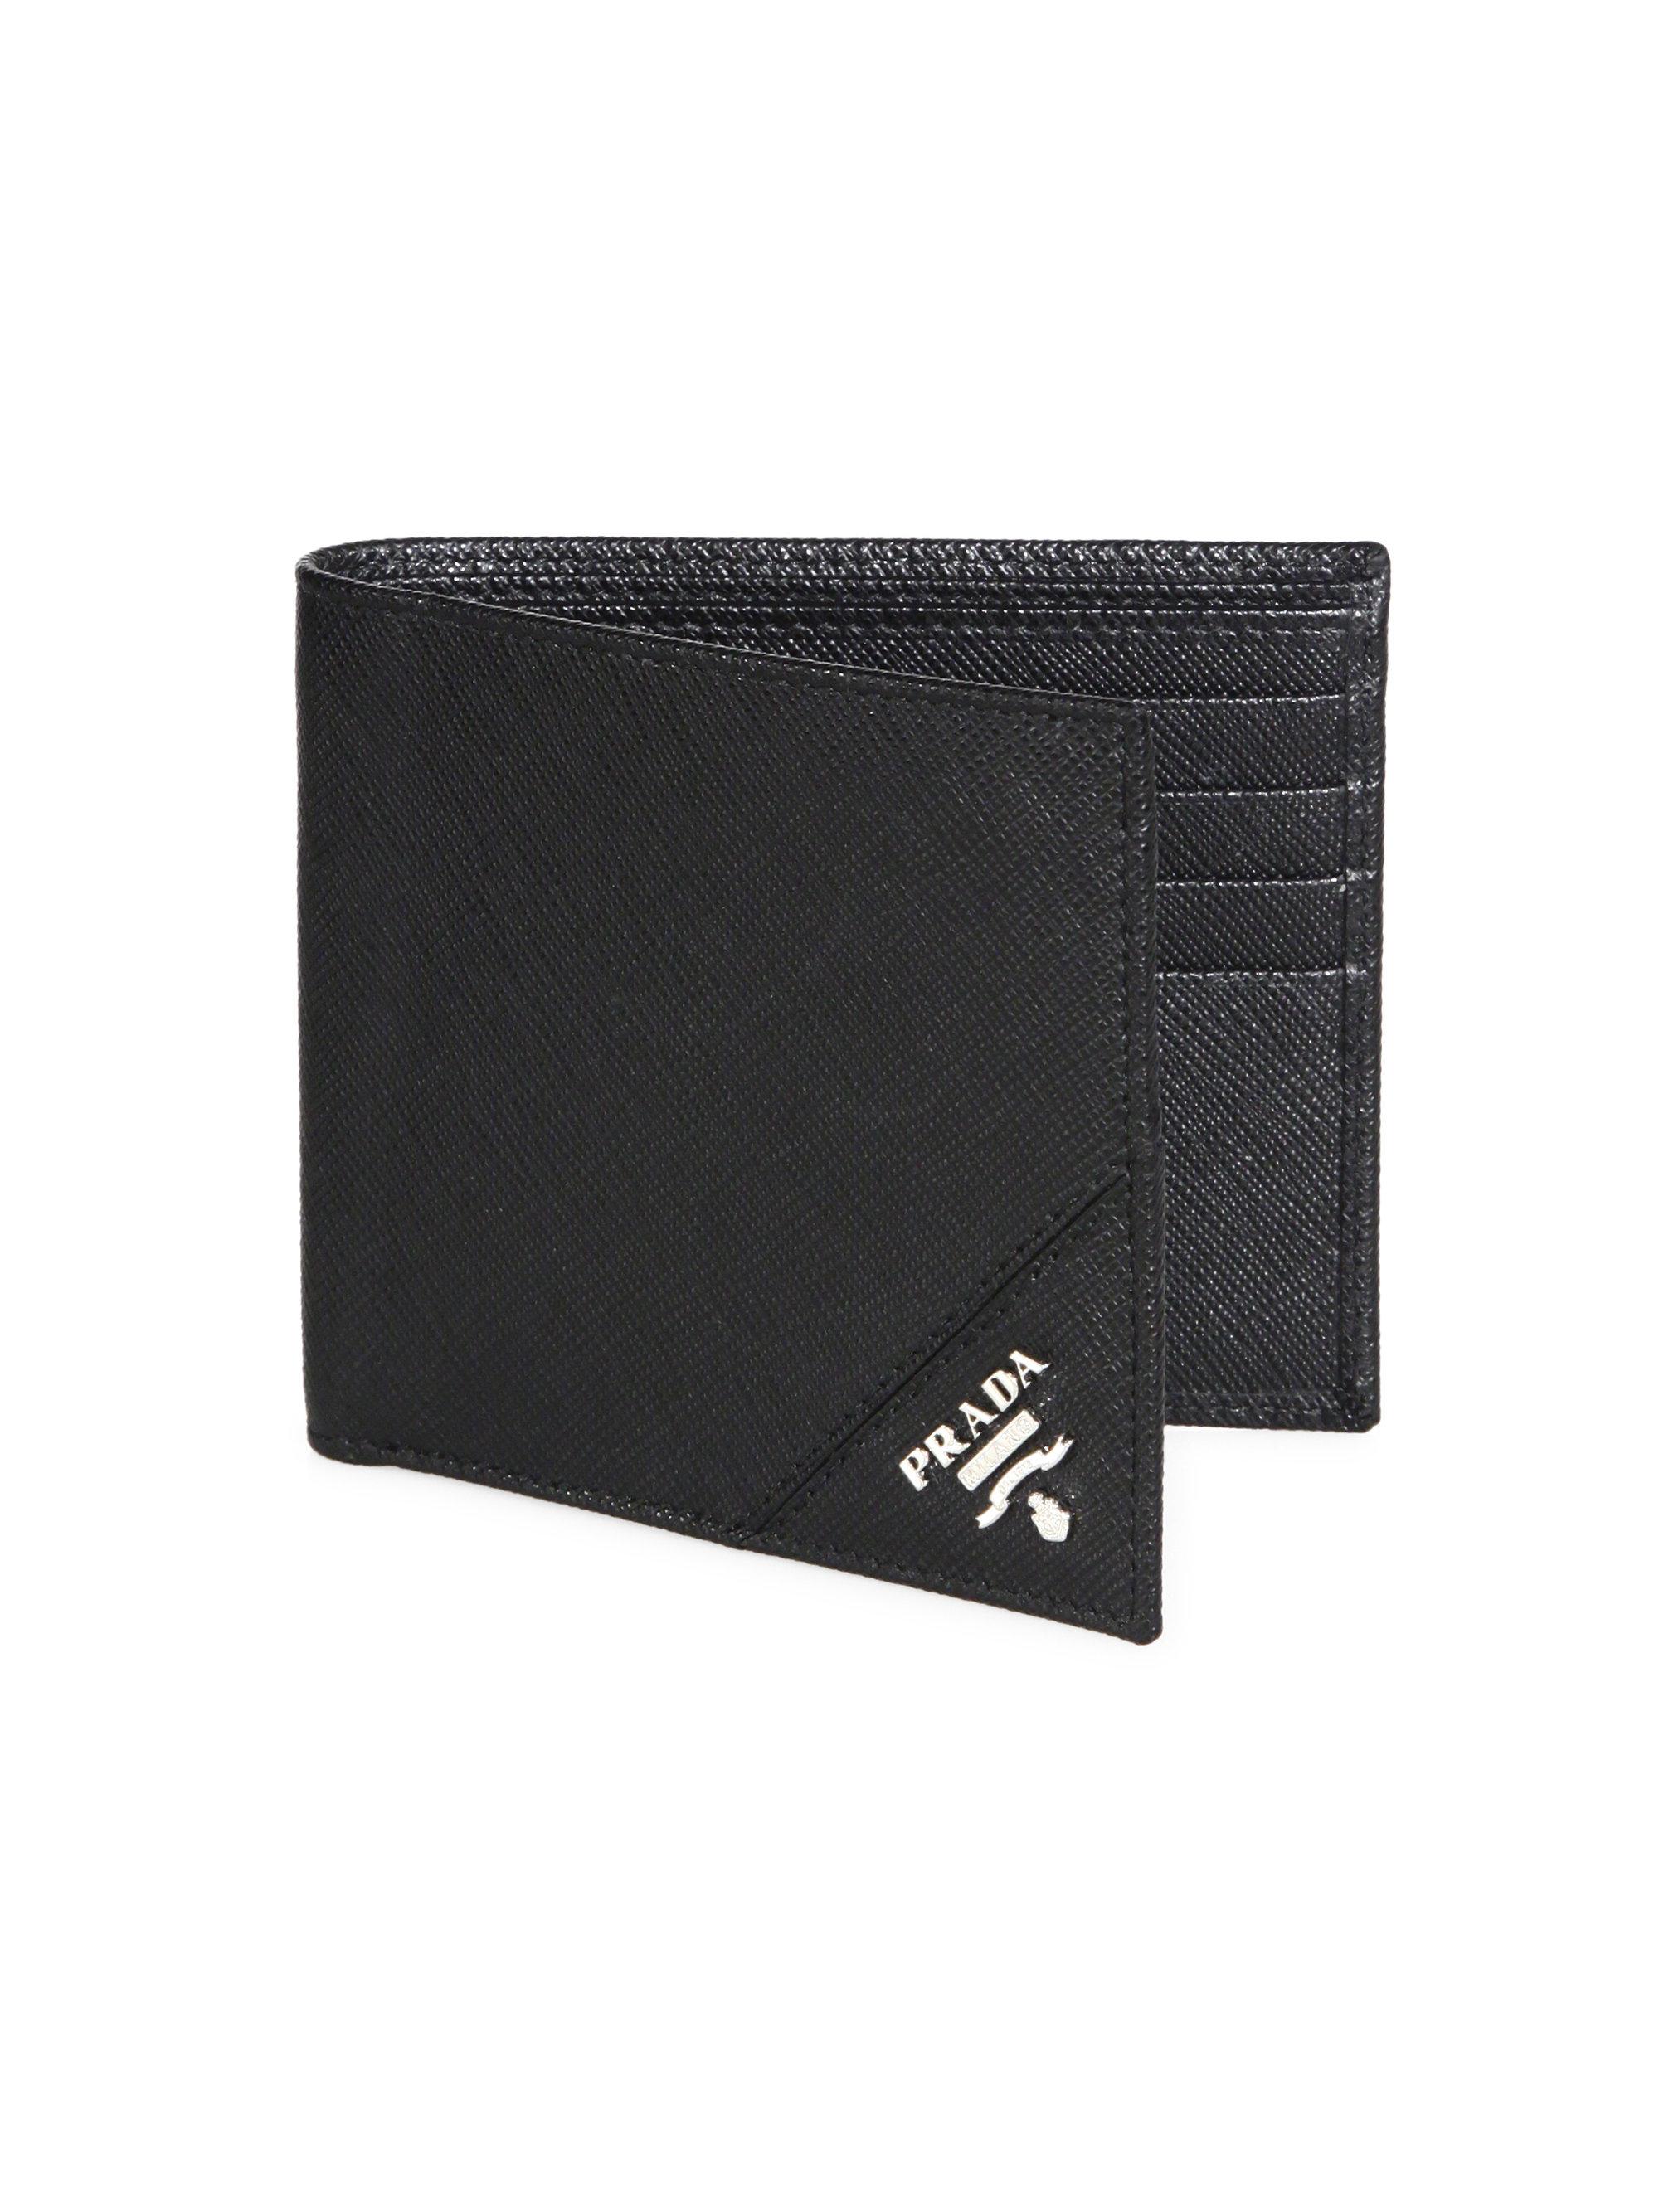 Lyst - Prada Orizzont Nero Leather Wallet in Black for Men